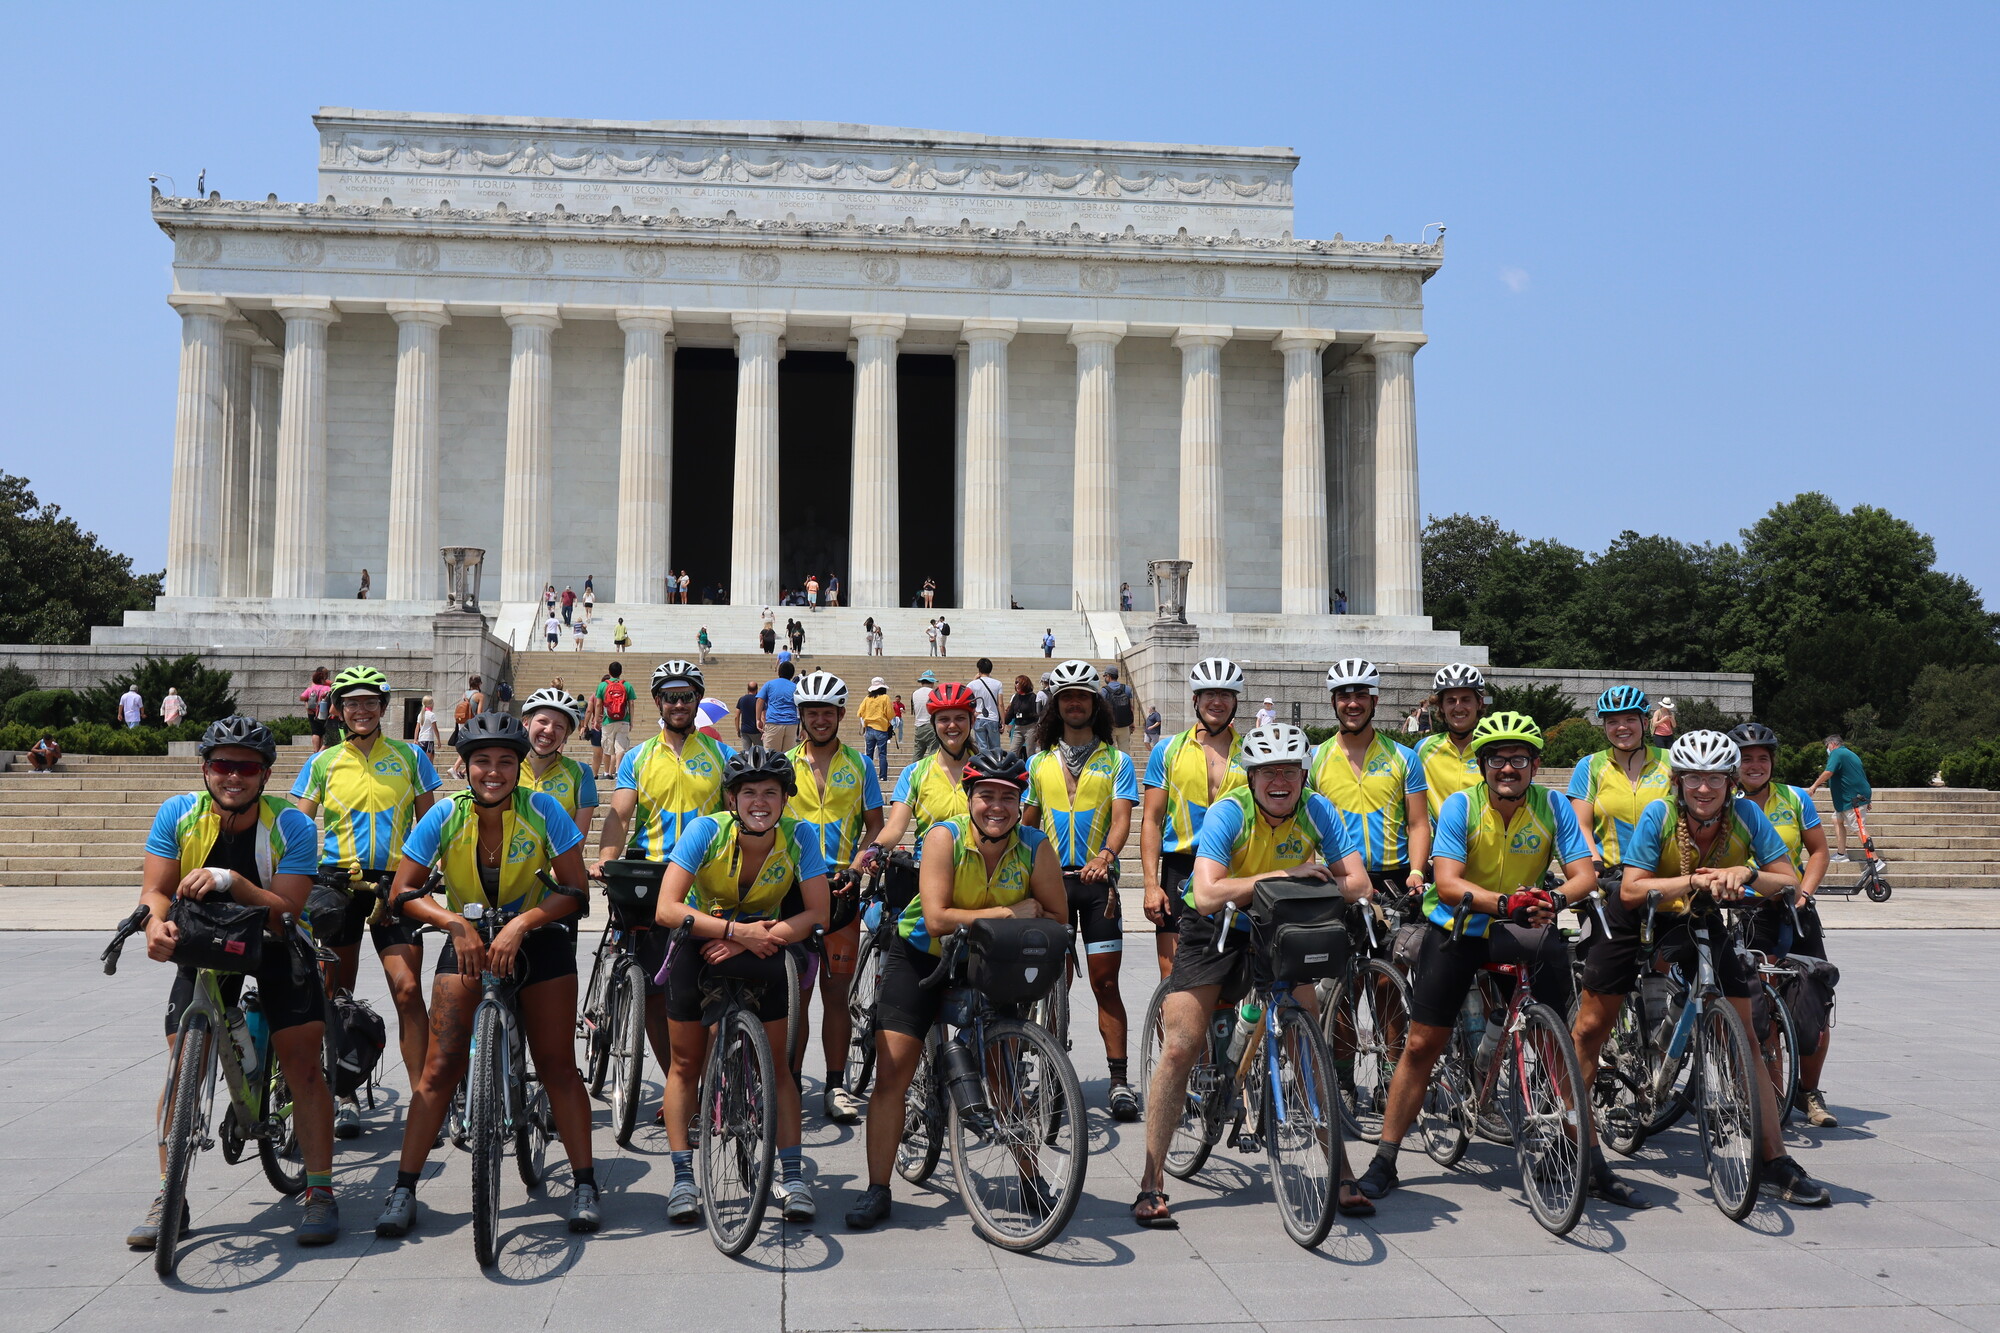 A group of cyclists standing in front of a US government building